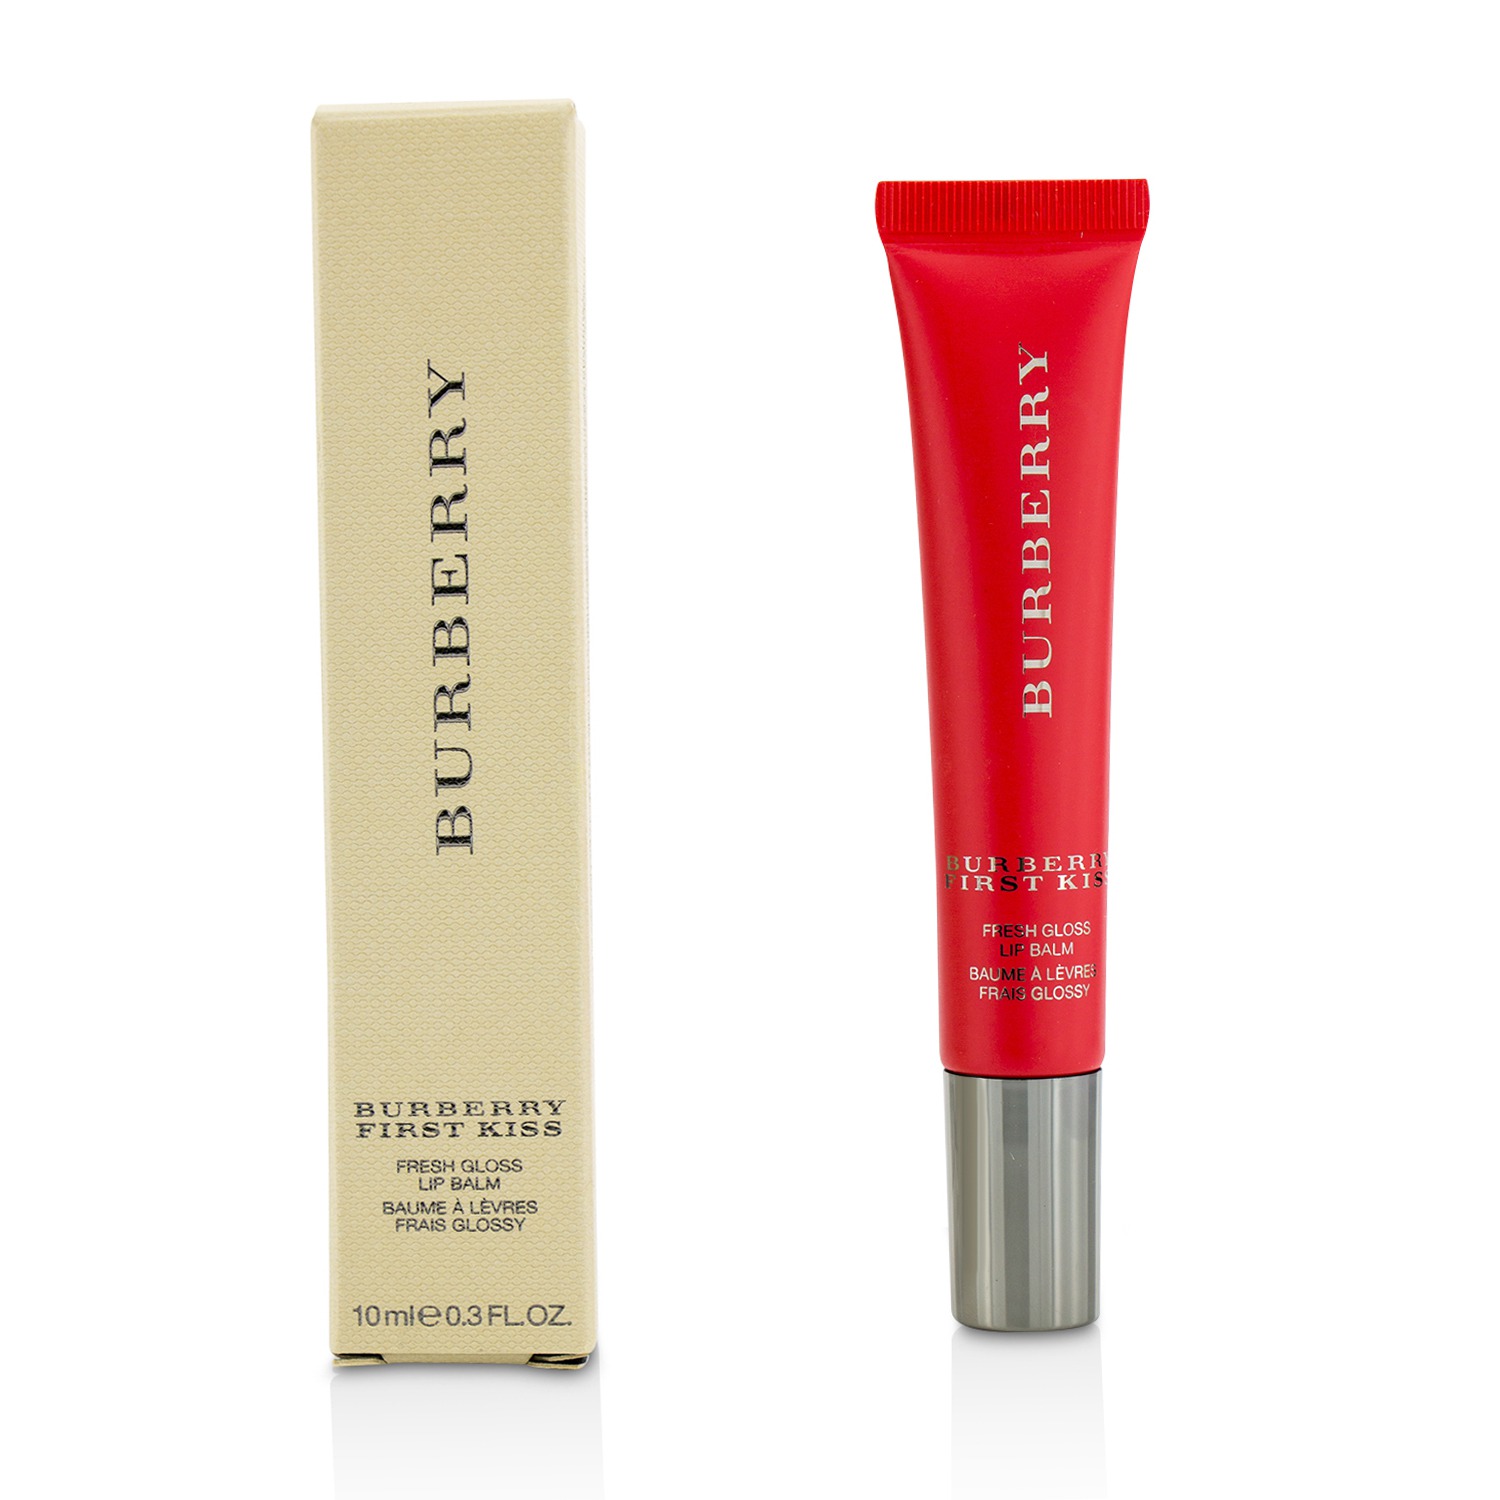 Burberry First Kiss Fresh Gloss Lip Balm - # No. 04 Crushed Red Burberry Image